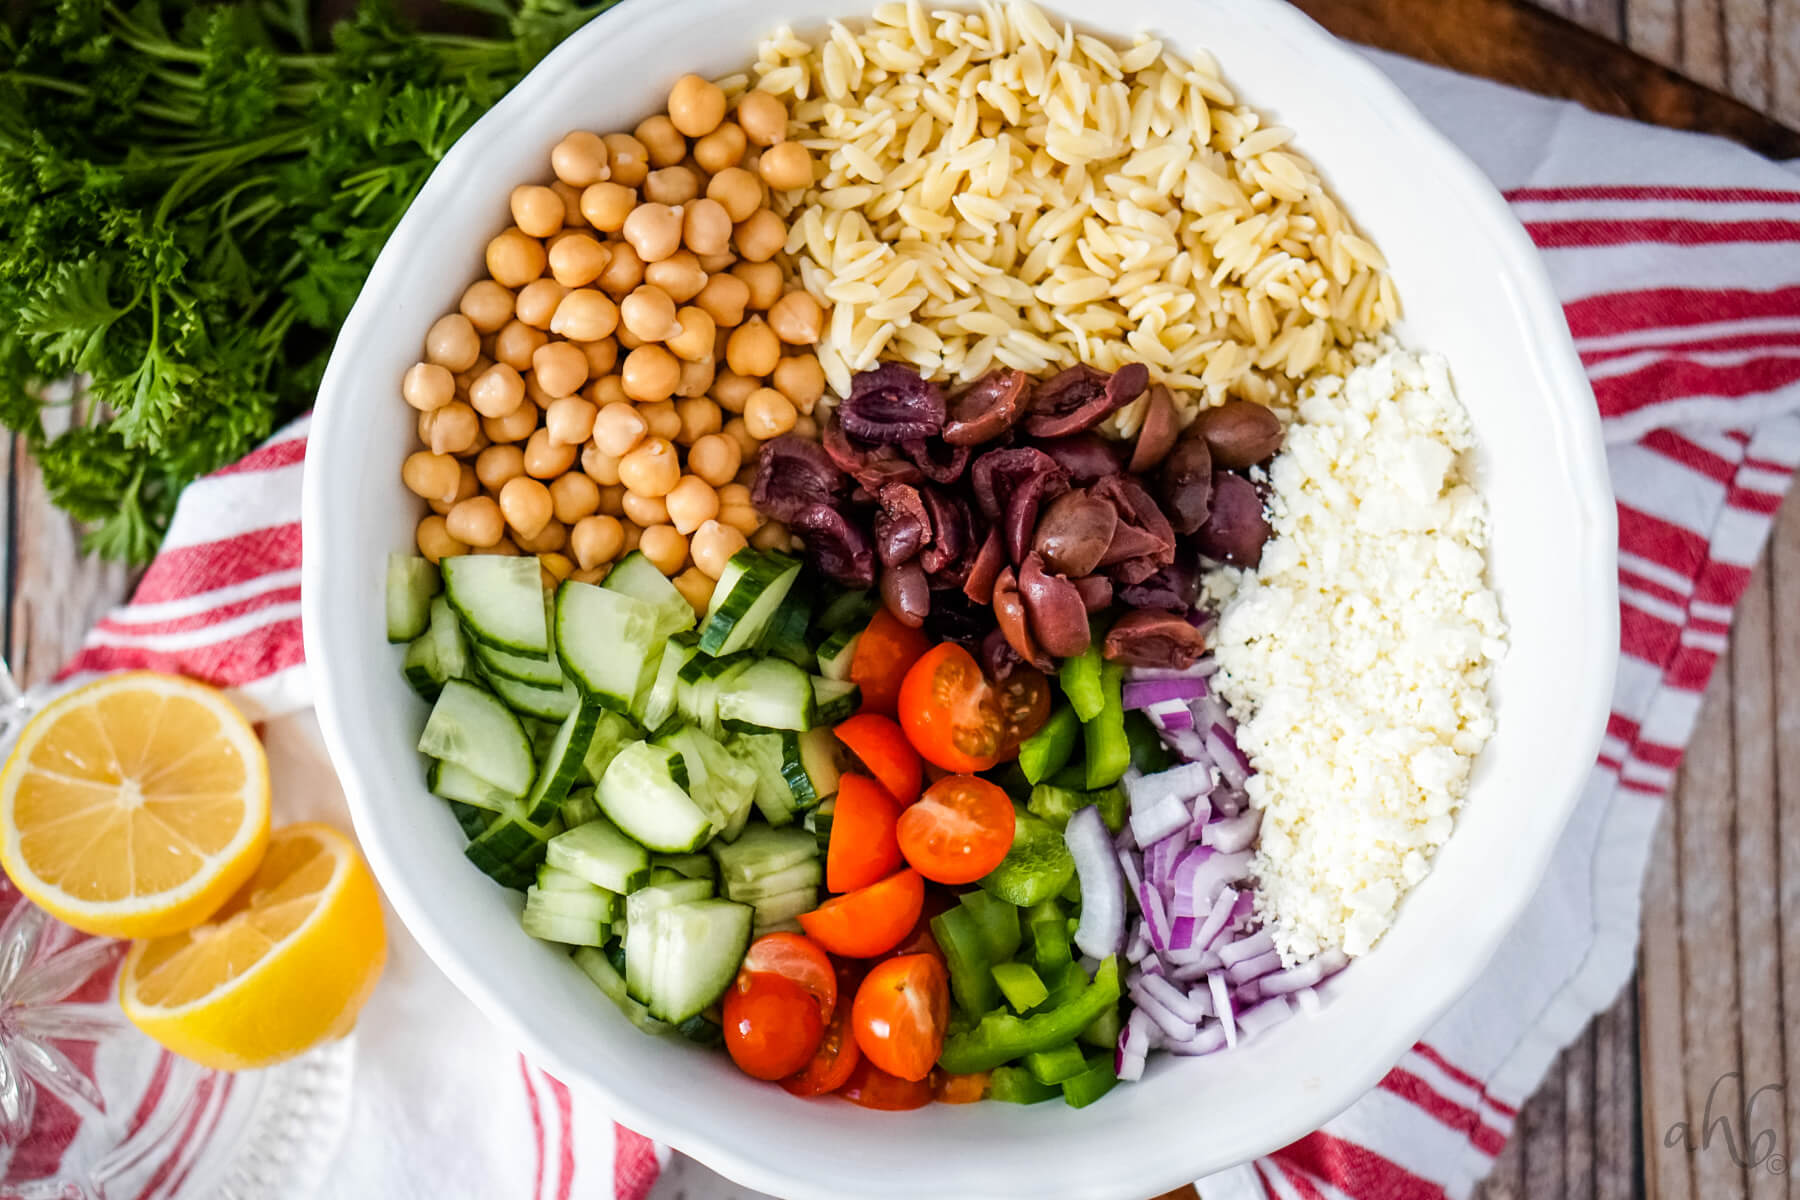 A large white bowl is filled with all the ingredients for the salad.